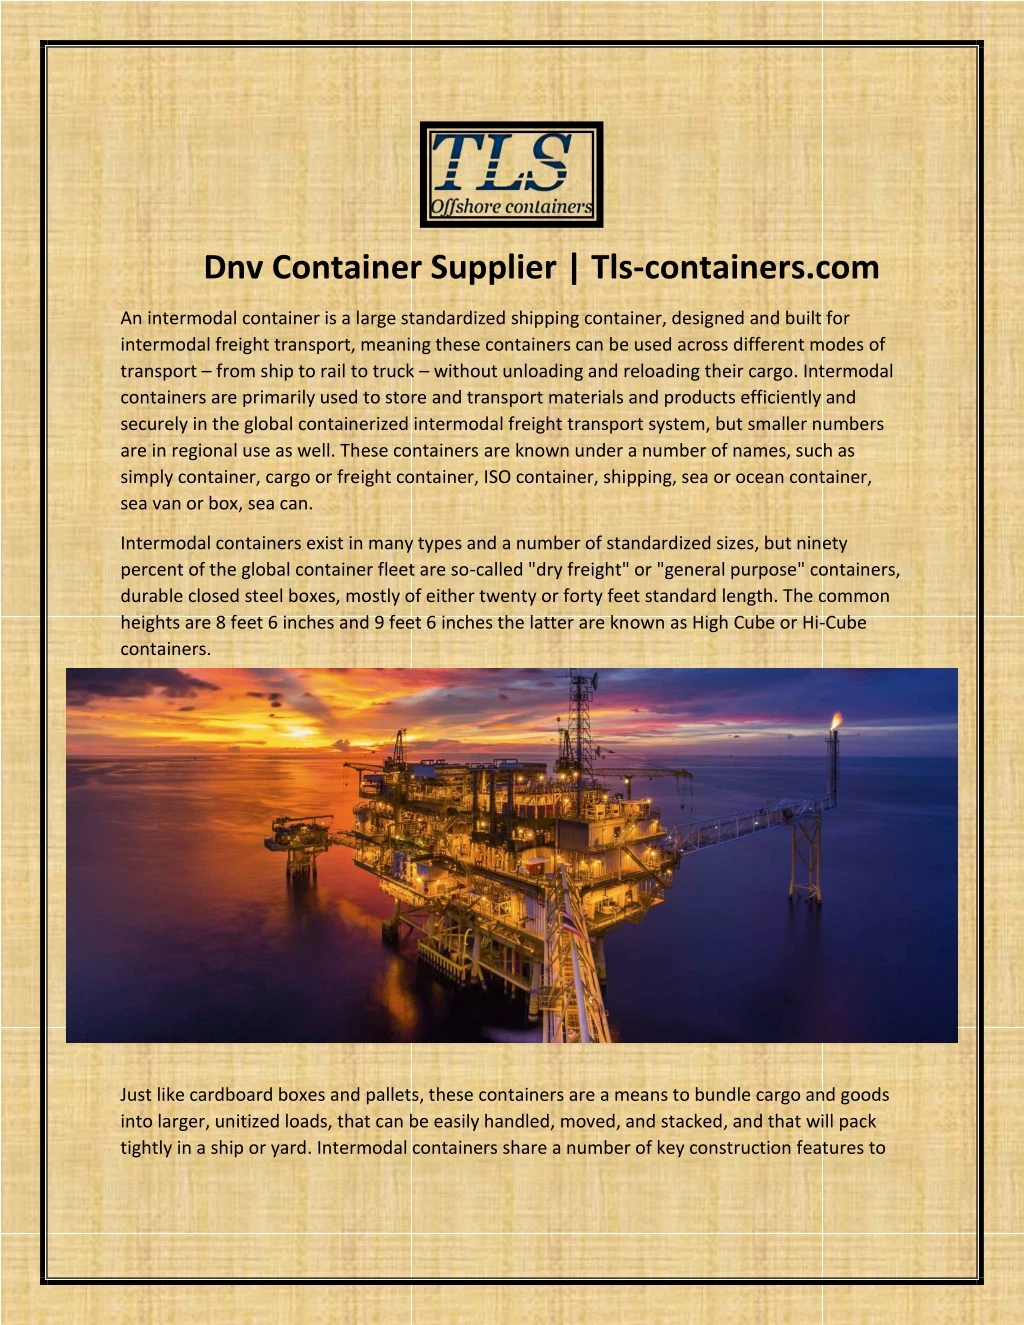 dnv container supplier tls containers com